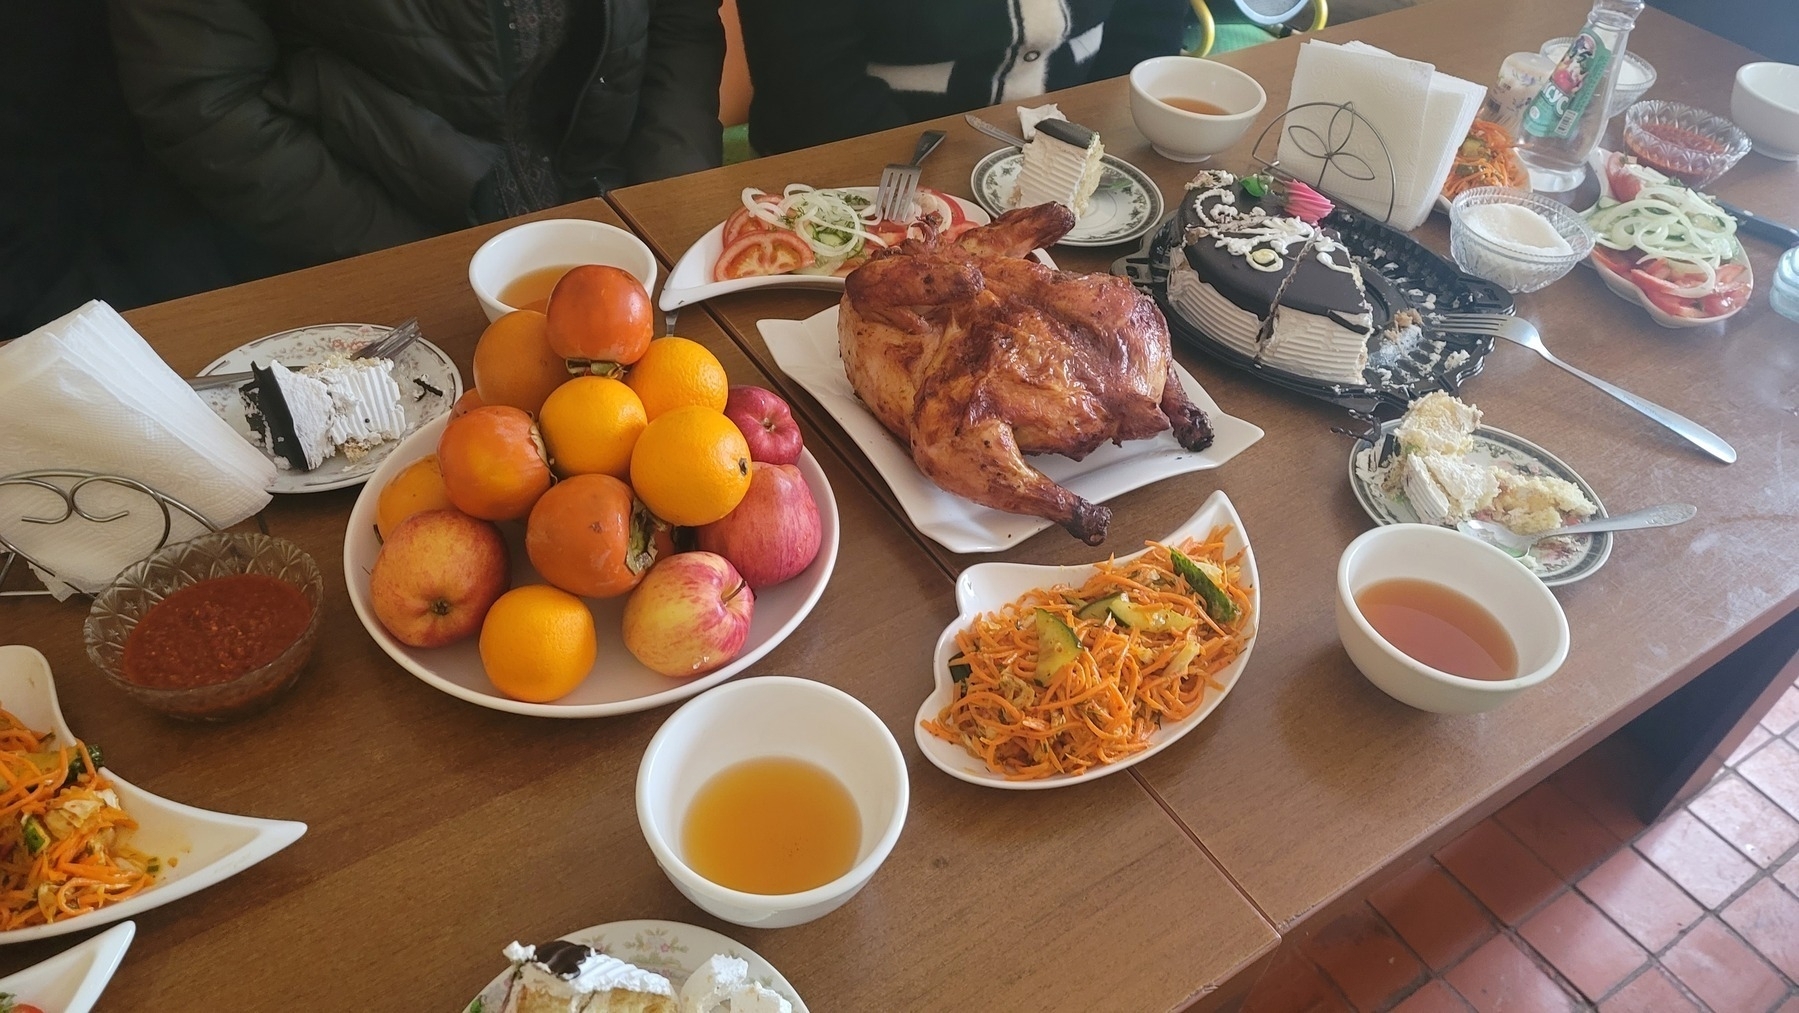 table with various plates: rotisserie chicken, cake, fruit, vegetable salads, tea